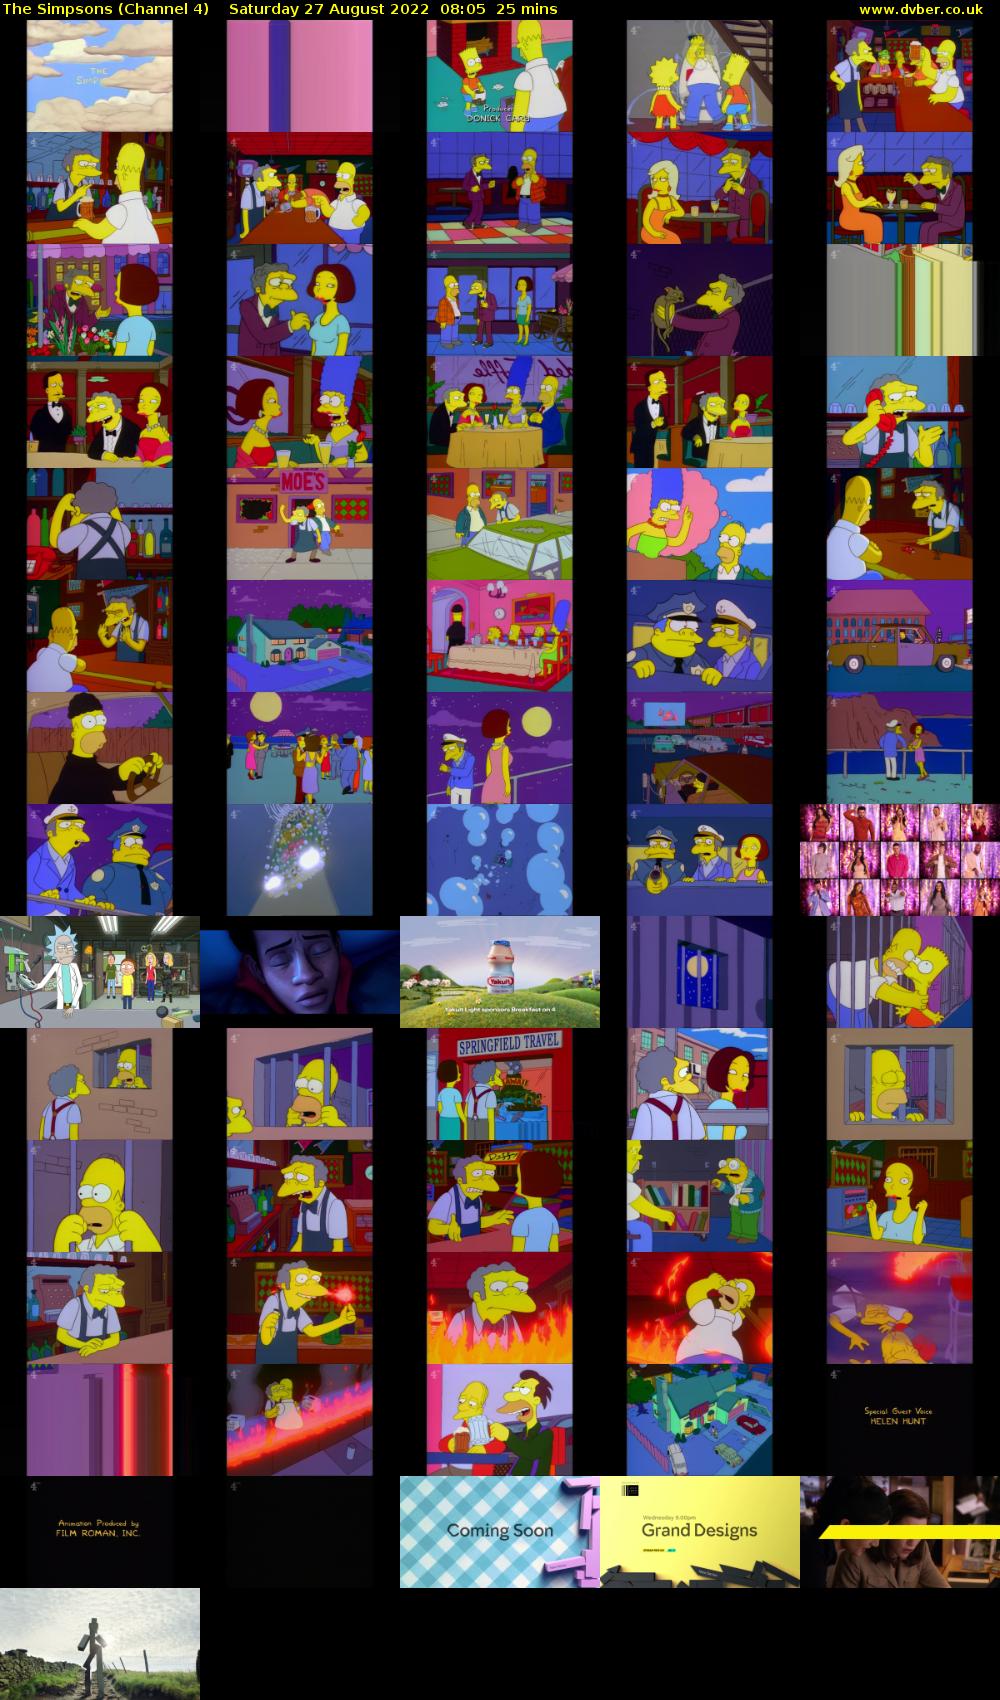 The Simpsons (Channel 4) Saturday 27 August 2022 08:05 - 08:30